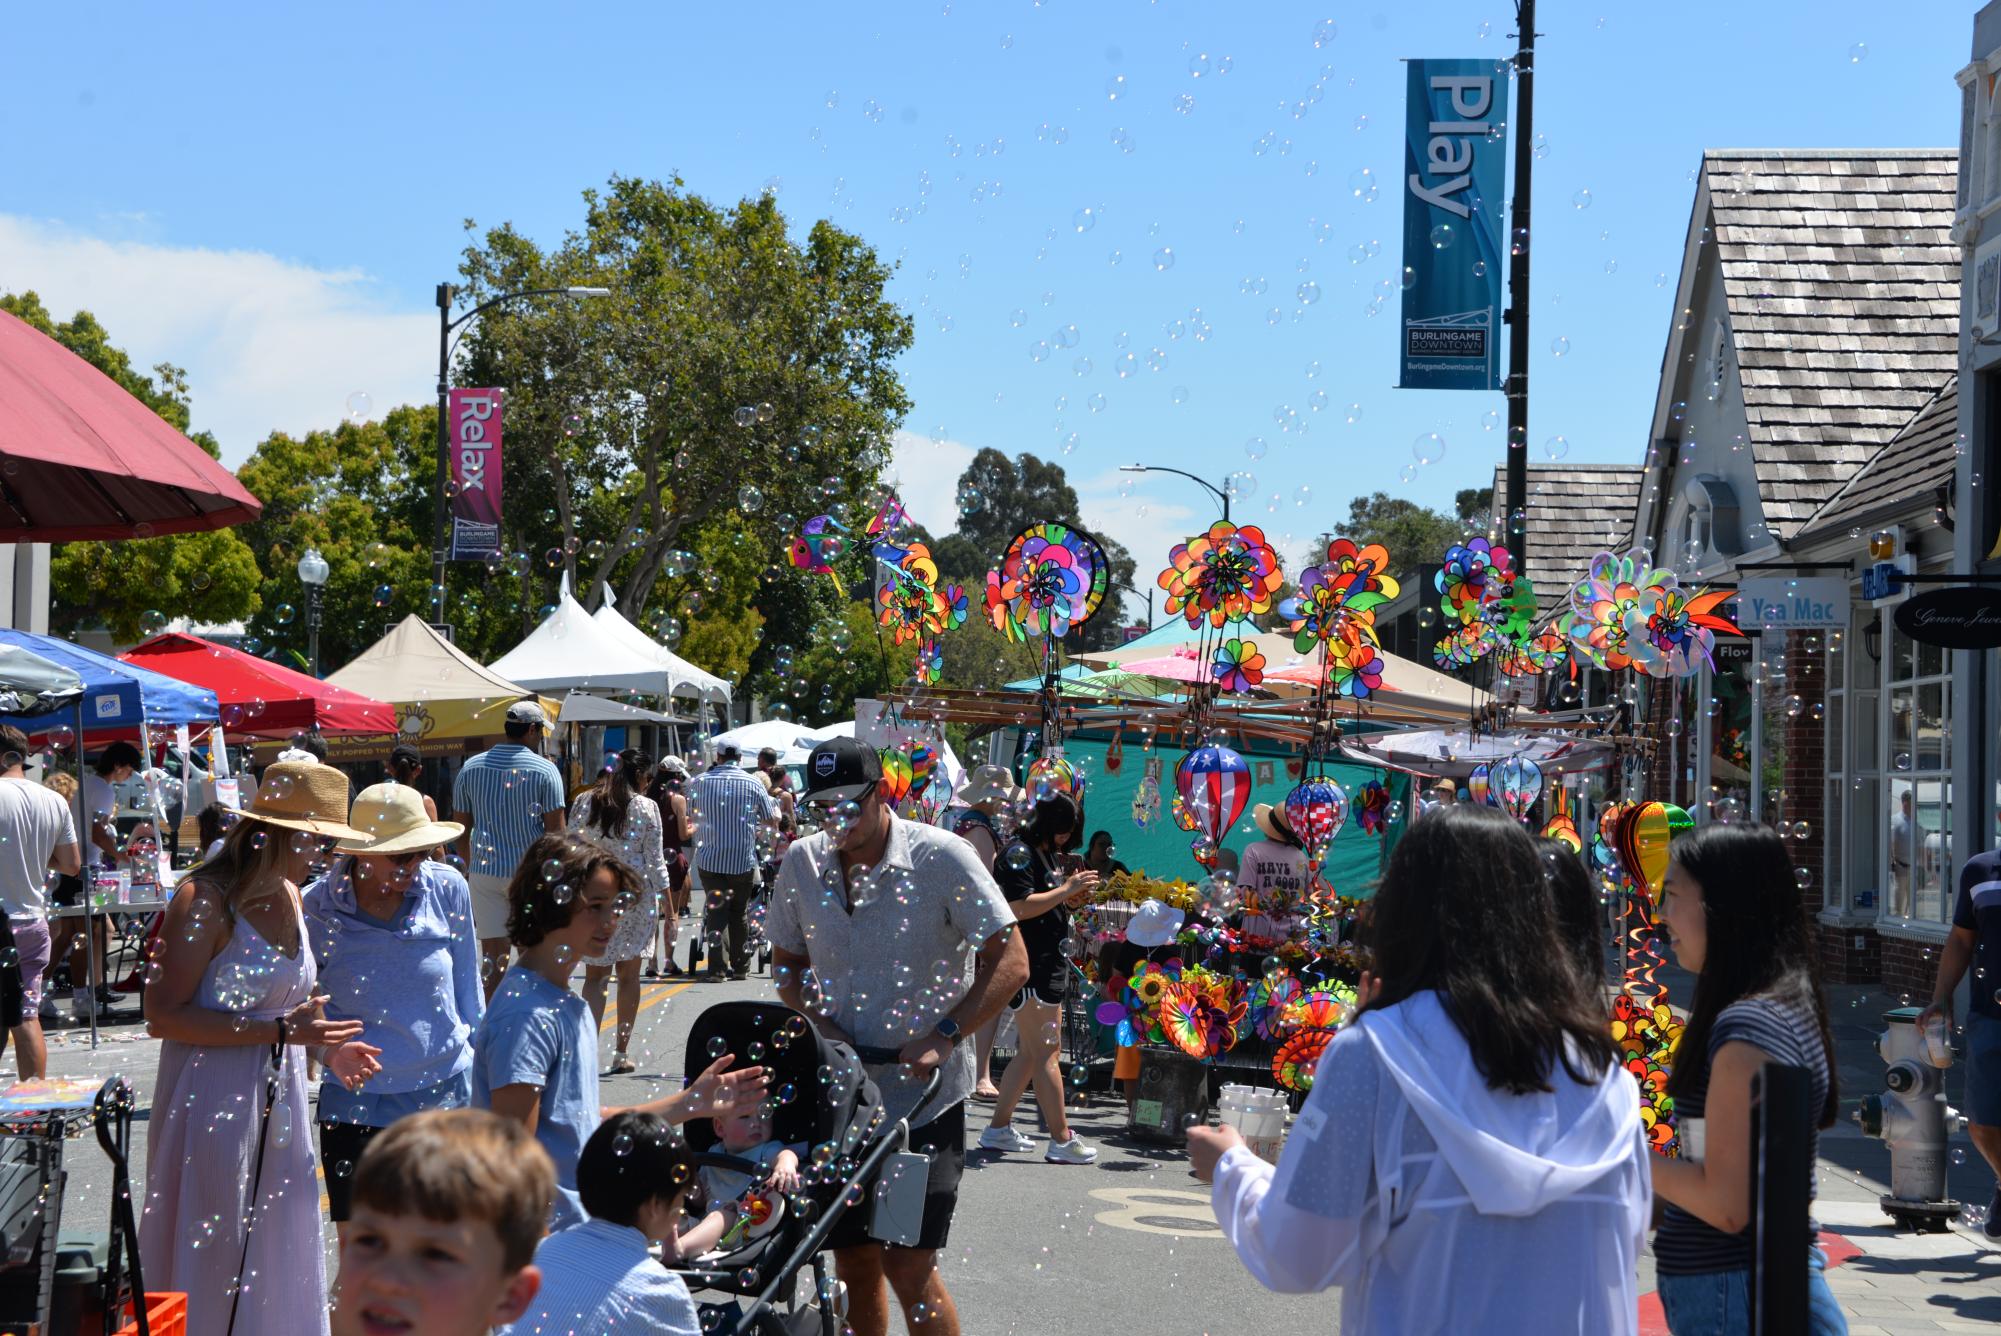 Booths%2C+food+trucks+and+live+music+crowd+the+streets+in+annual+%E2%80%9CBurlingame+on+the+Avenue%E2%80%9D+festival